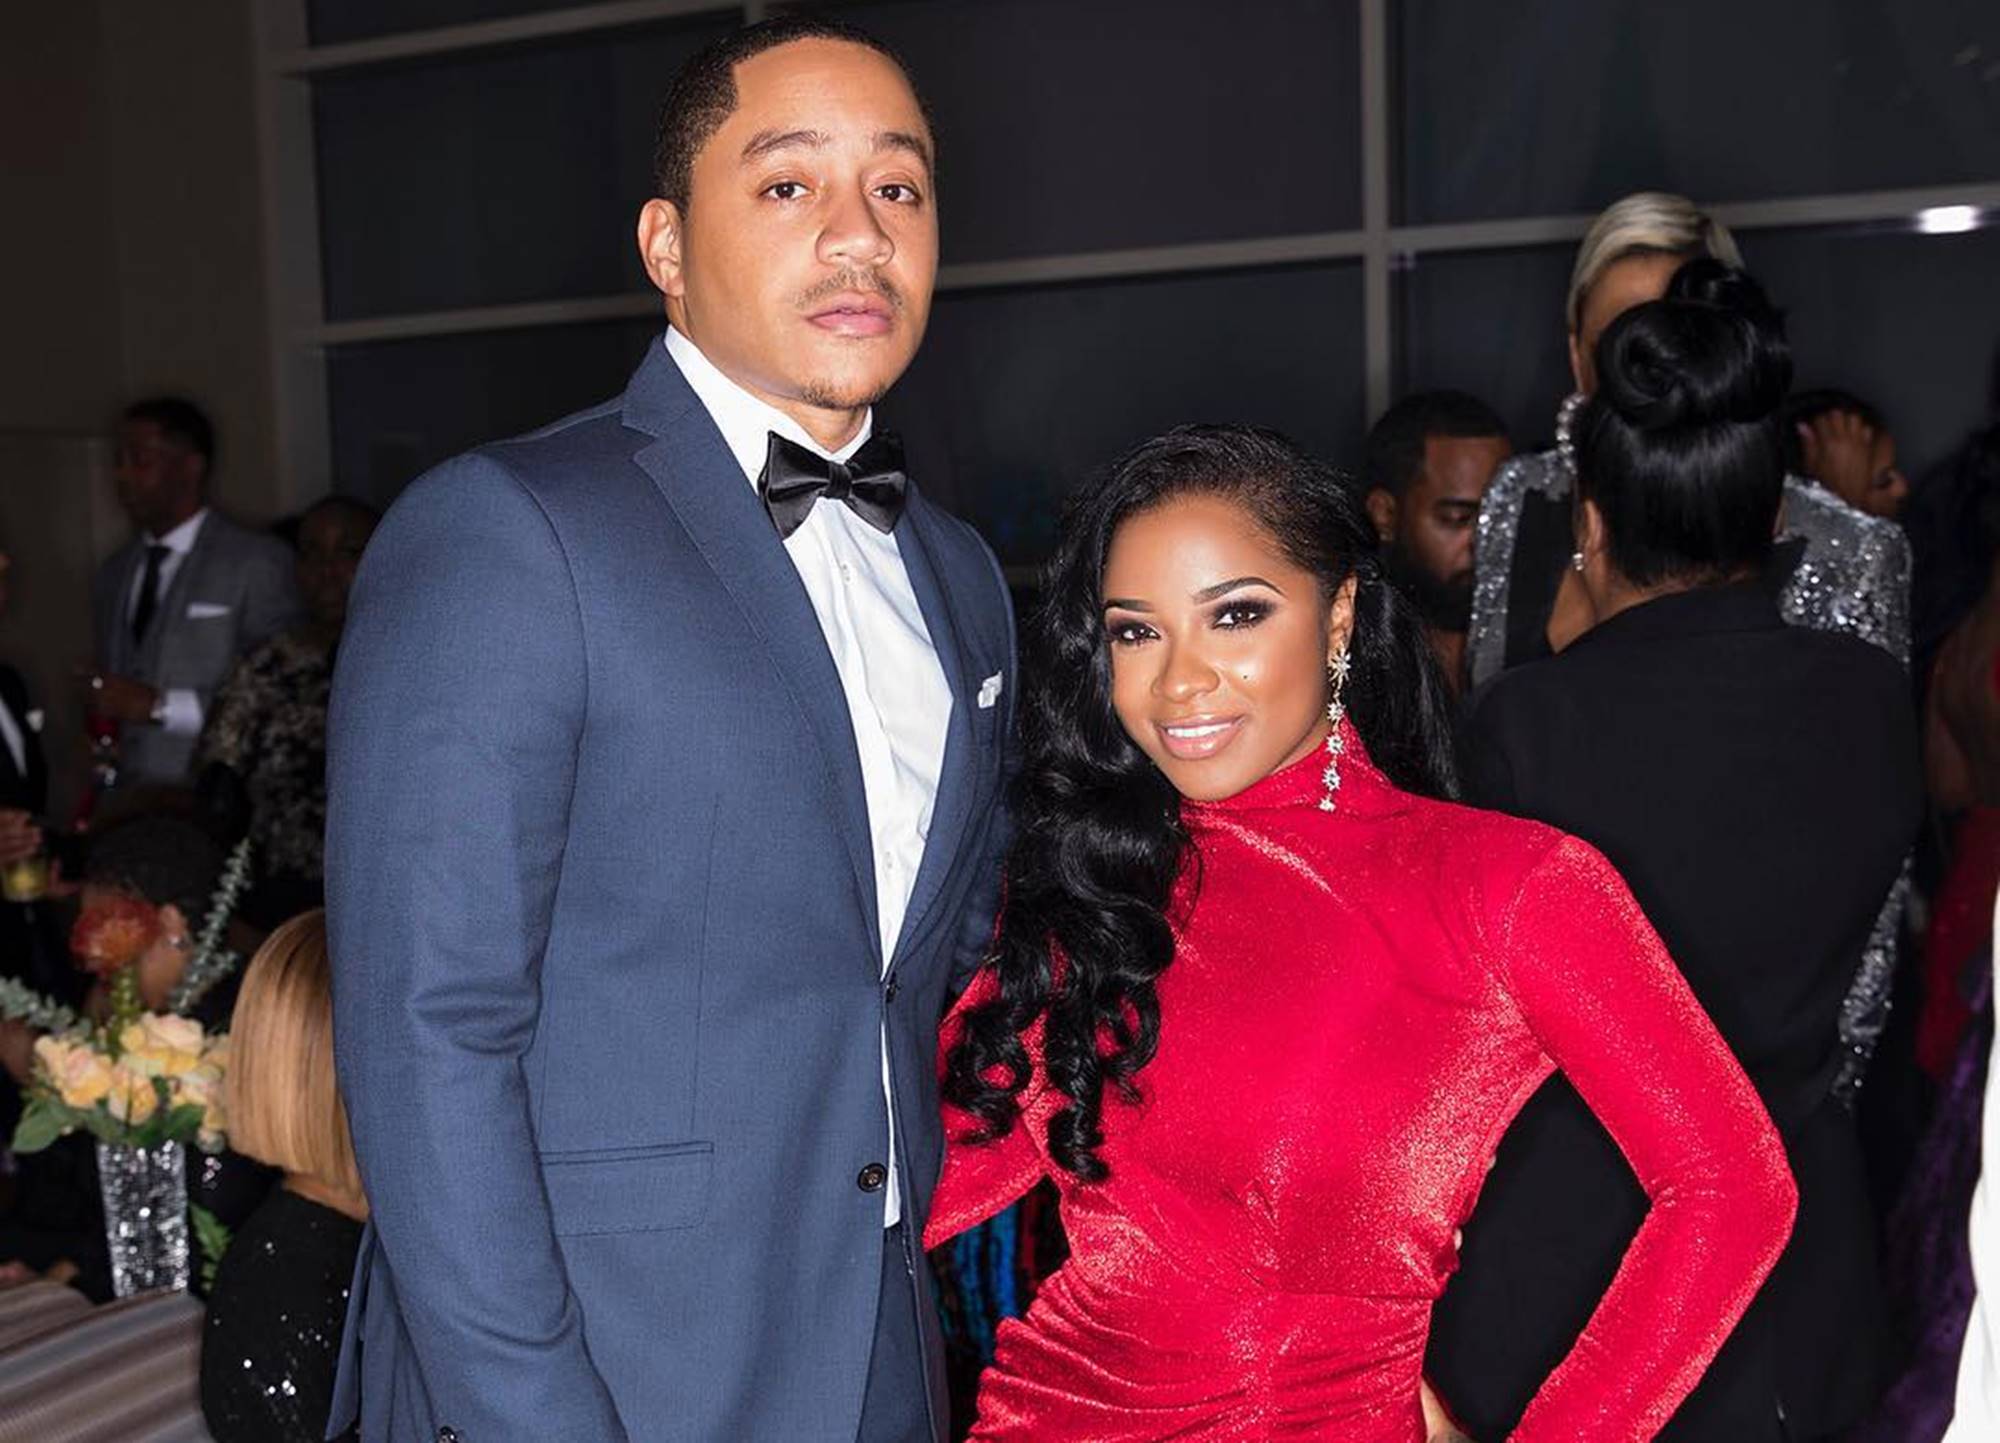 Toya Wright And Robert Rushing Present Their New Fat Burner And Fans Are Excited